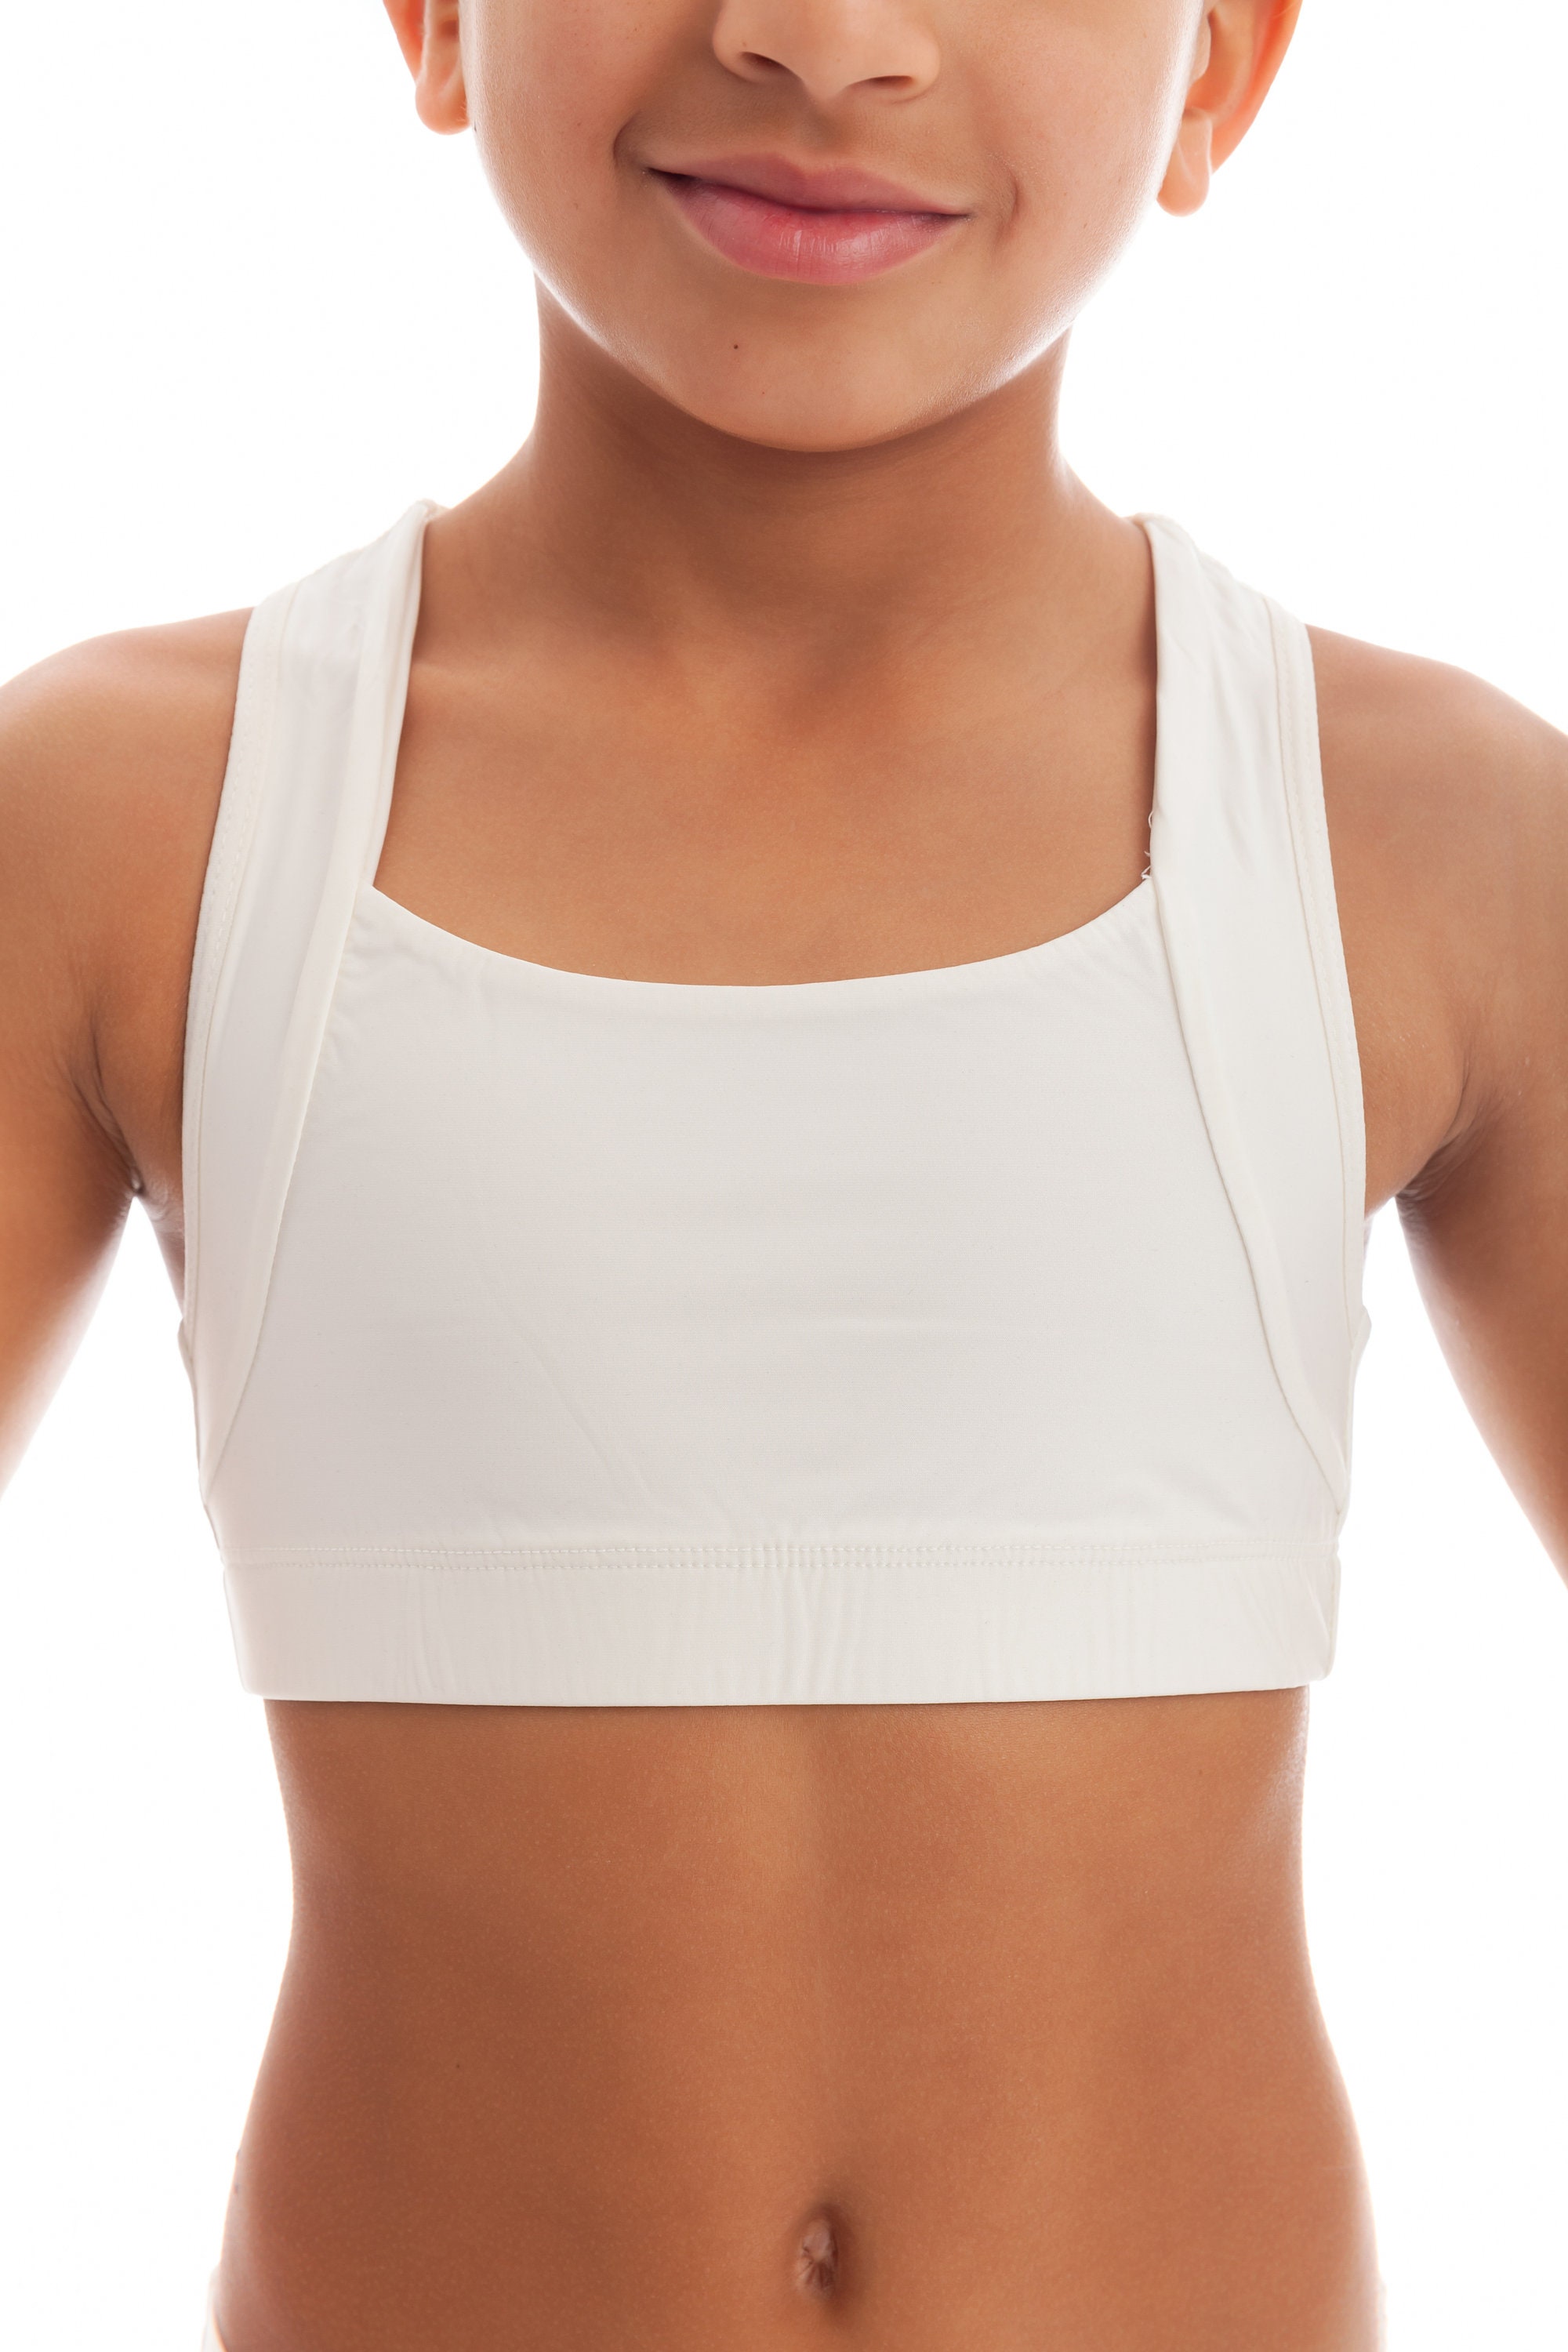 VeaRin Training Bras for Girl's 8 10 12 Teens India